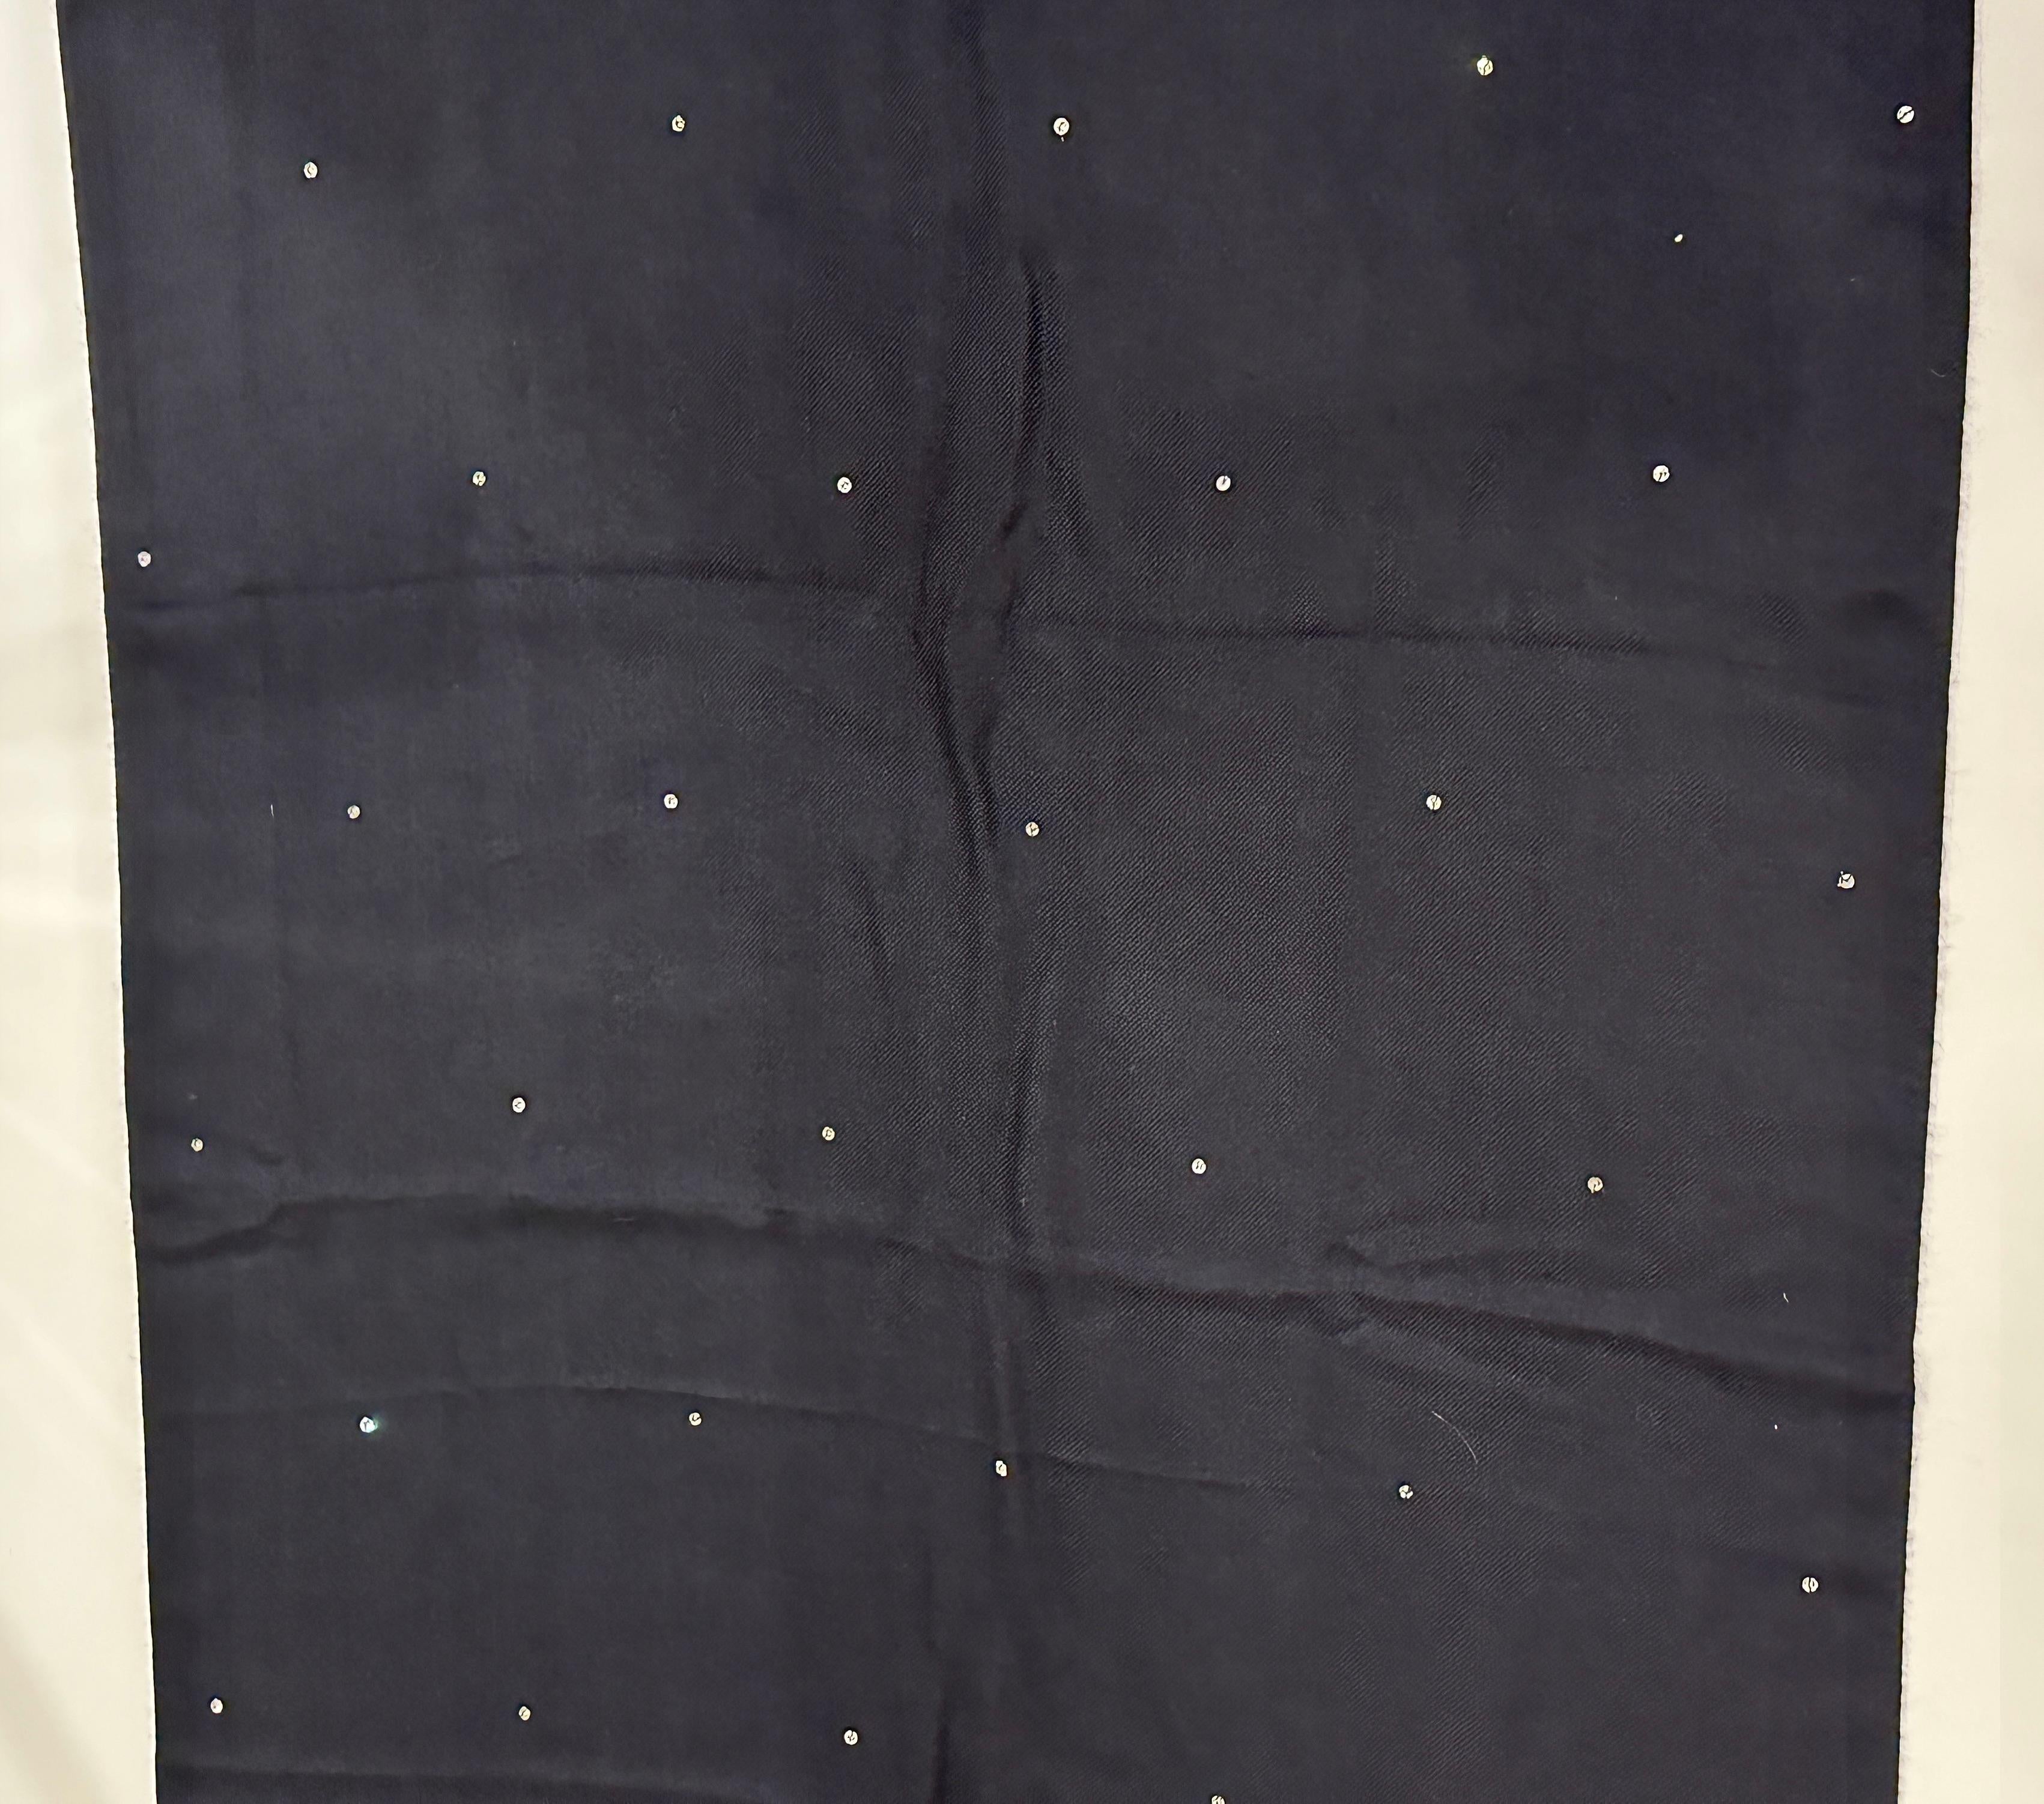 Loro Piana Wonderfully Lightweight Fringed Studded Midnight-Black Cashmere Shawl In Good Condition For Sale In New York, NY